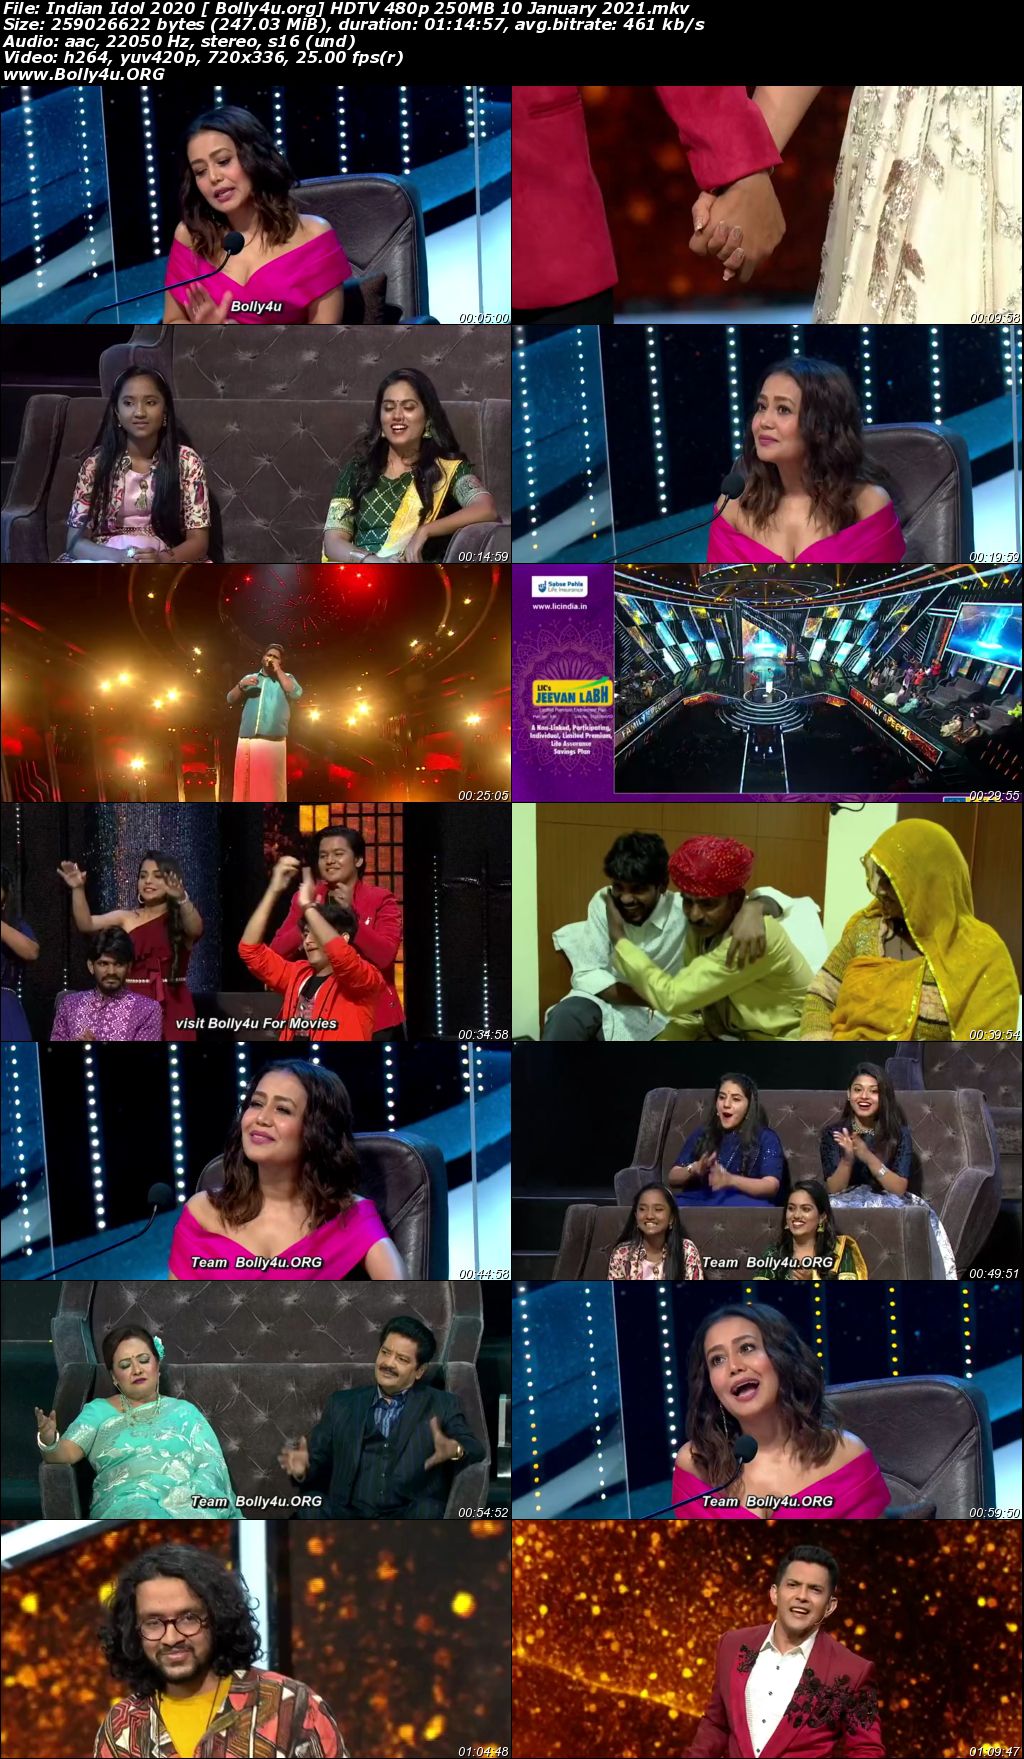 Indian Idol 2020 HDTV 480p 250MB 10 January 2021 Download